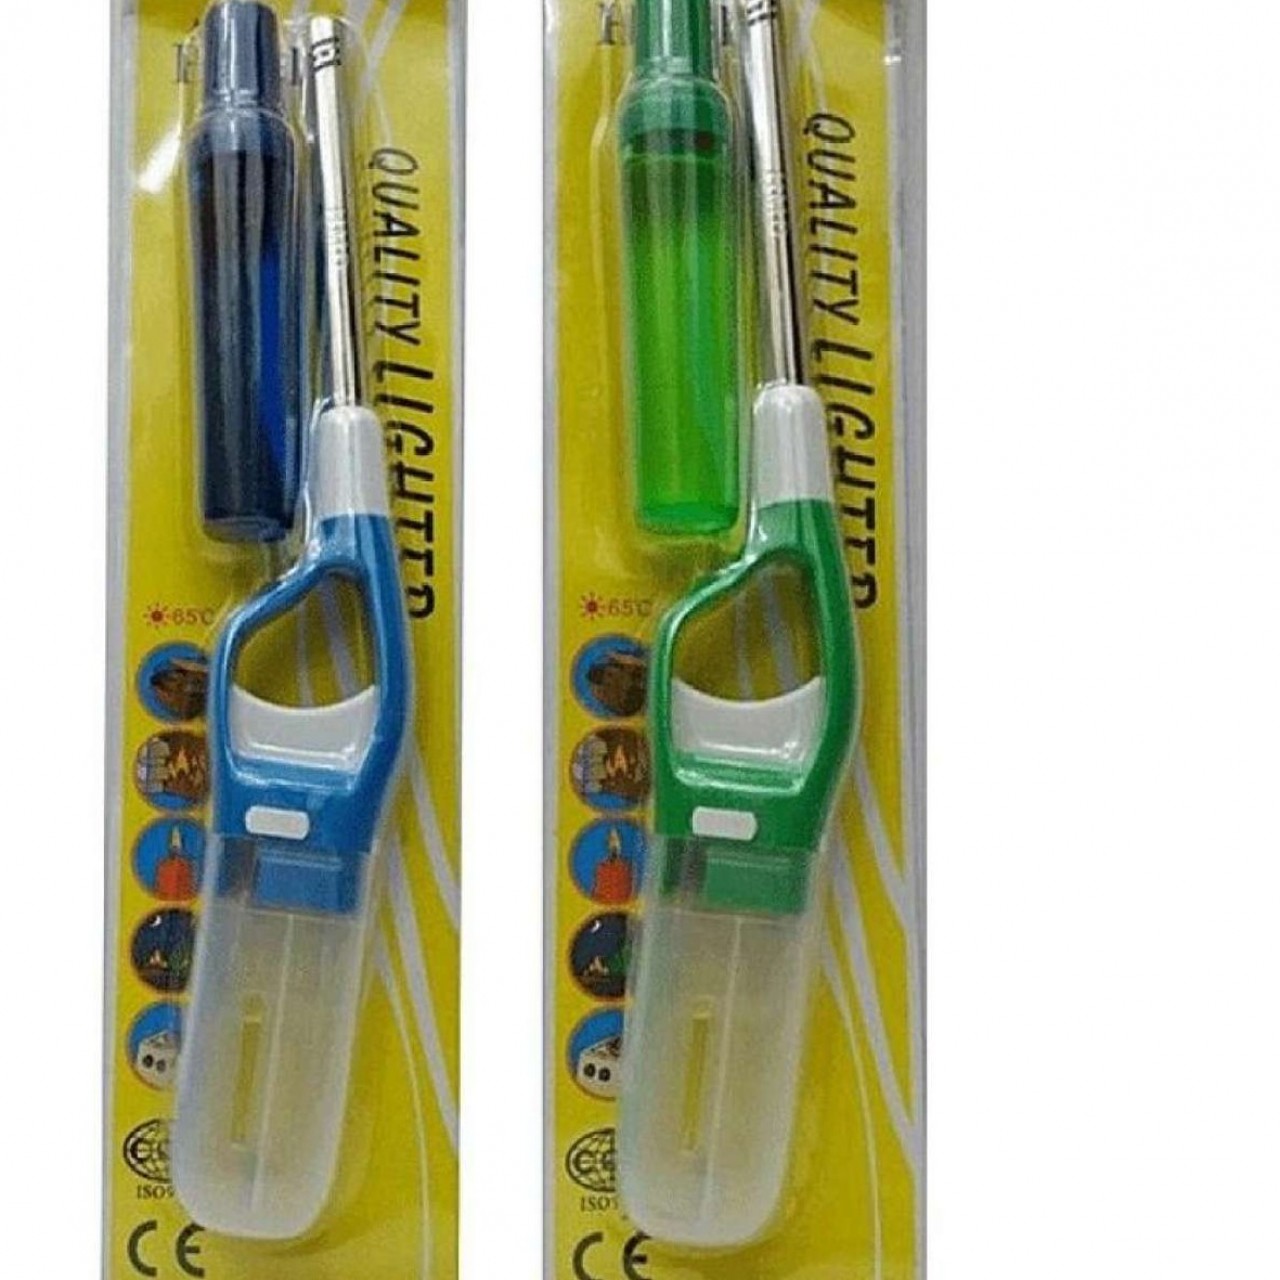 Pack Of 2 - Gas Lighter For Kitchen With Refill - Multi Color